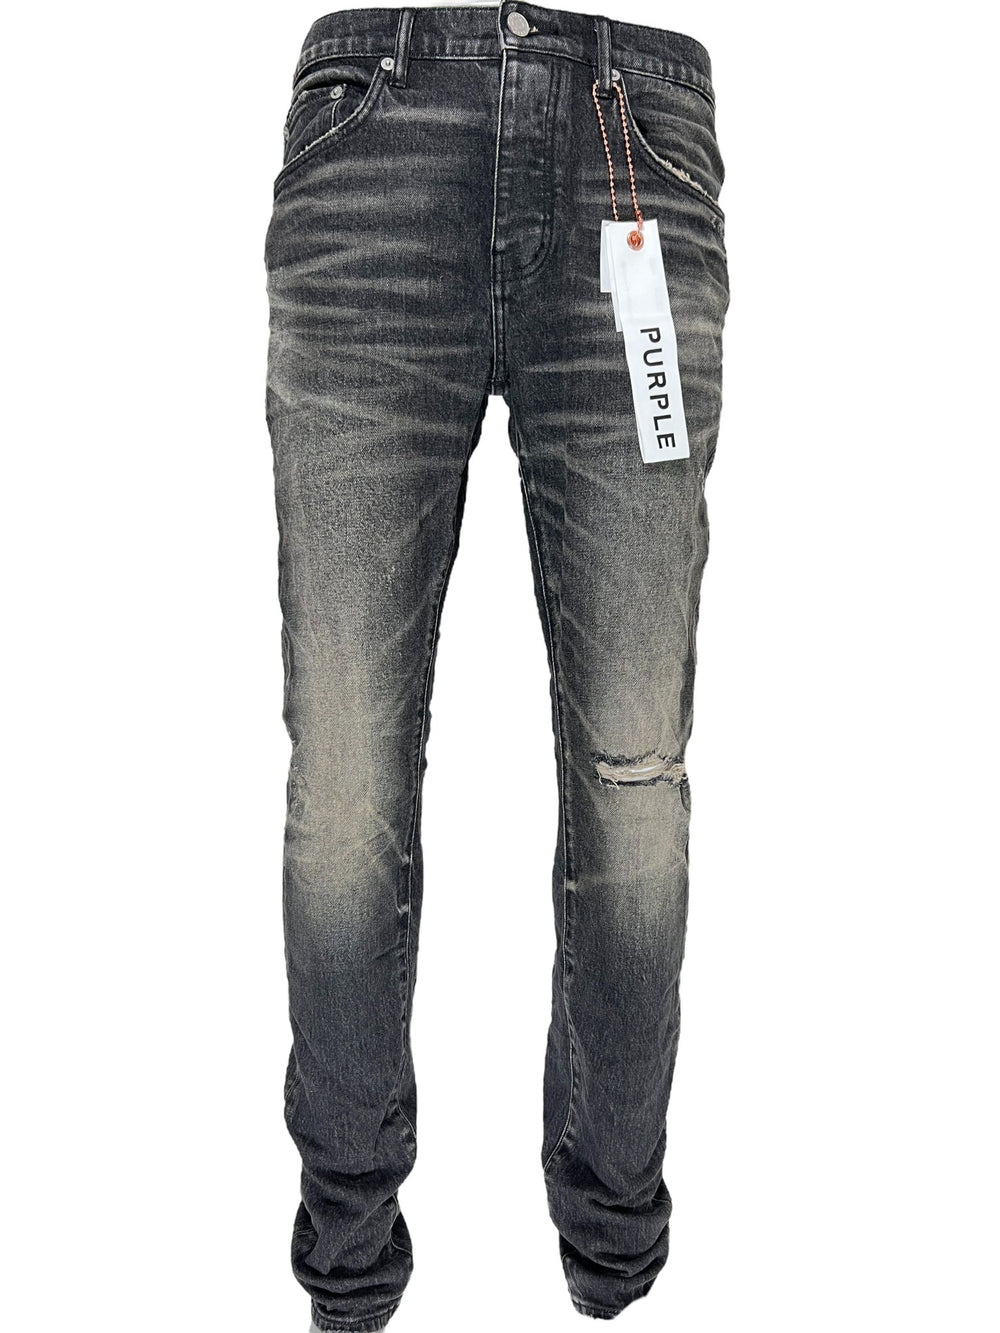 A pair of PURPLE BRAND men's premium jeans with a tag on them.